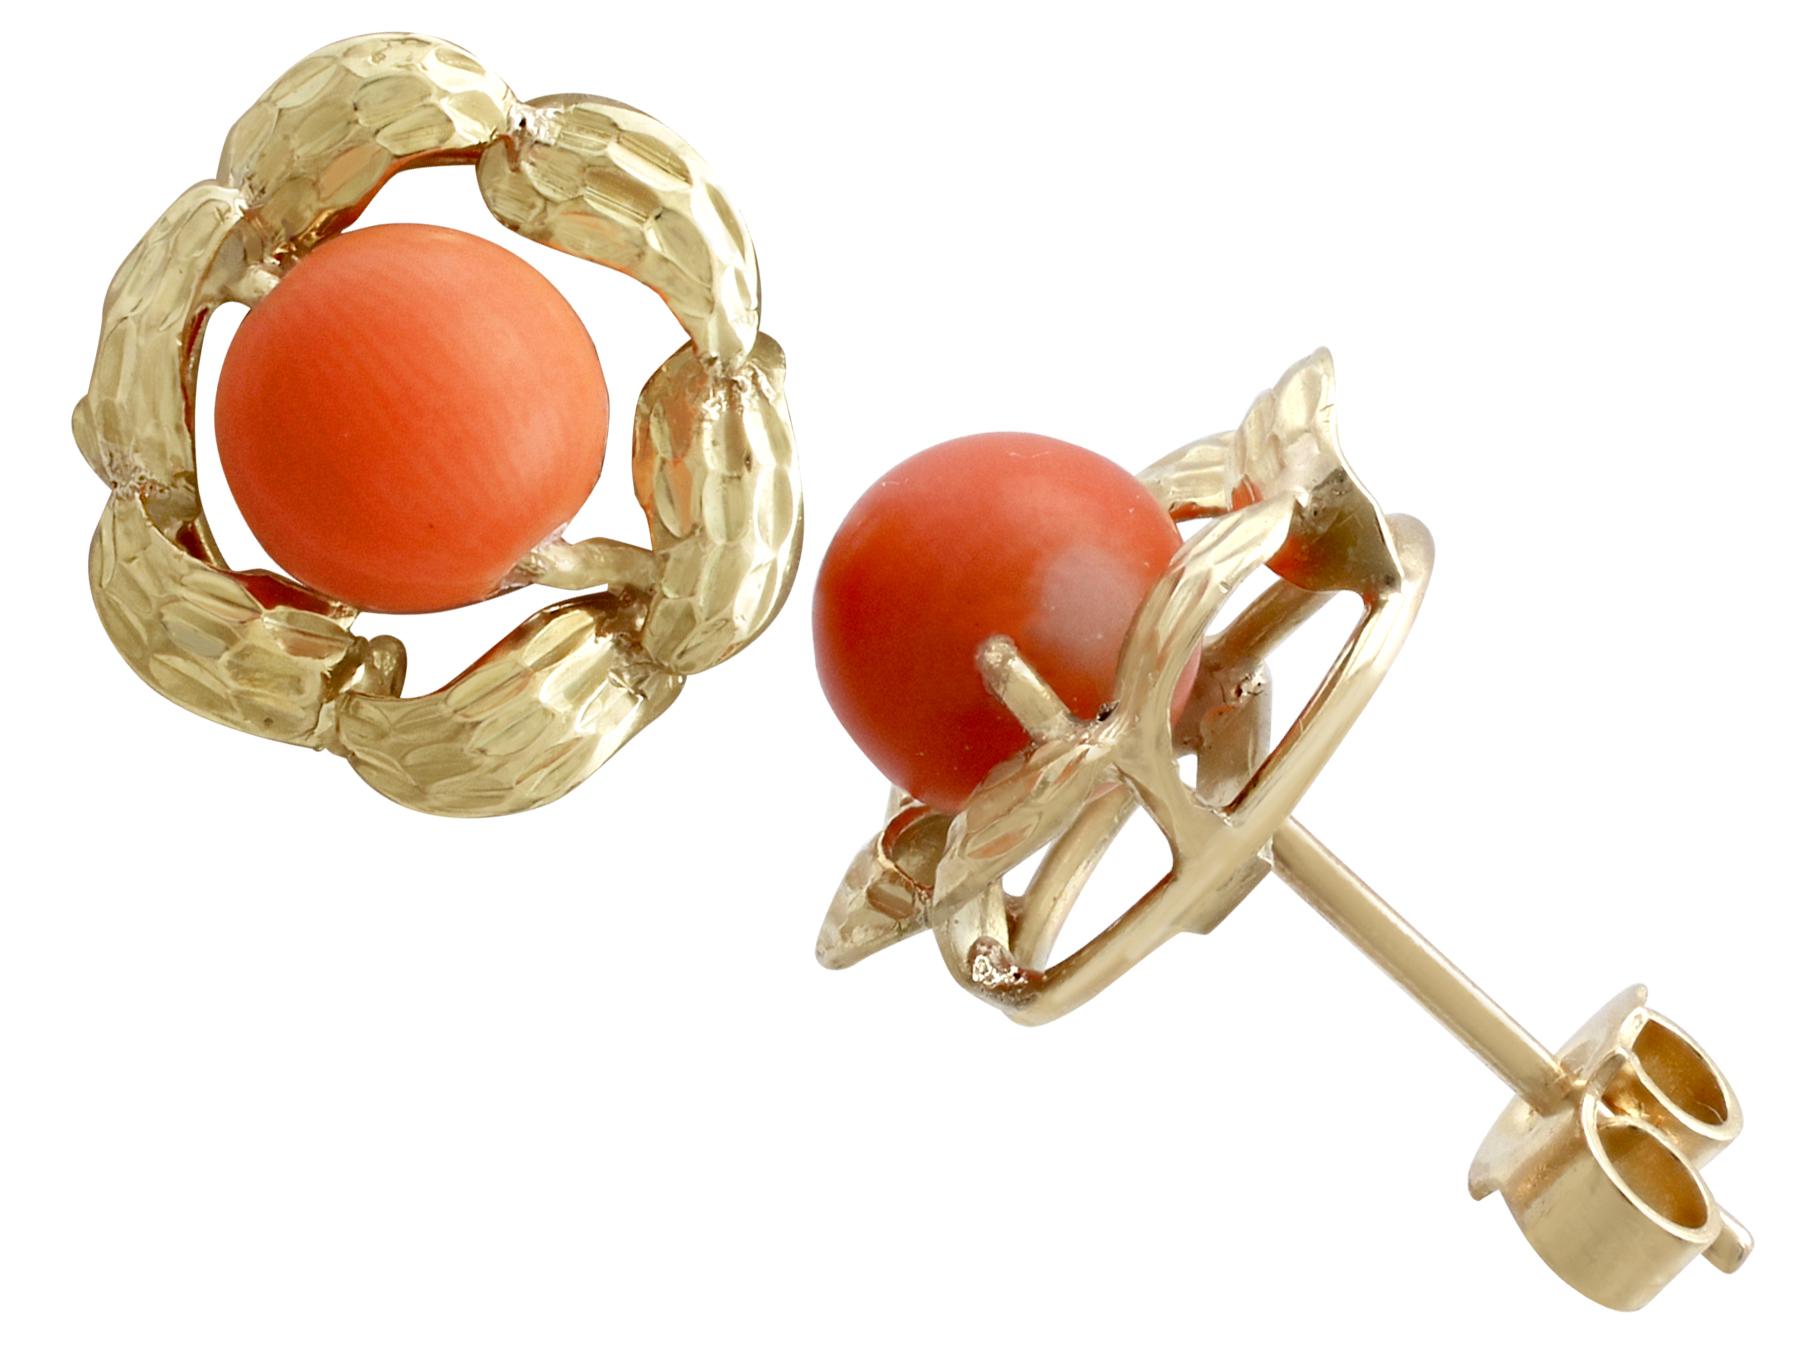 An impressive pair of vintage 1970s red coral and 18 karat yellow gold stud earrings; part of our diverse vintage jewelry and estate jewelry collections.

These fine and impressive red coral earrings have been crafted in 18k yellow gold.

Each of